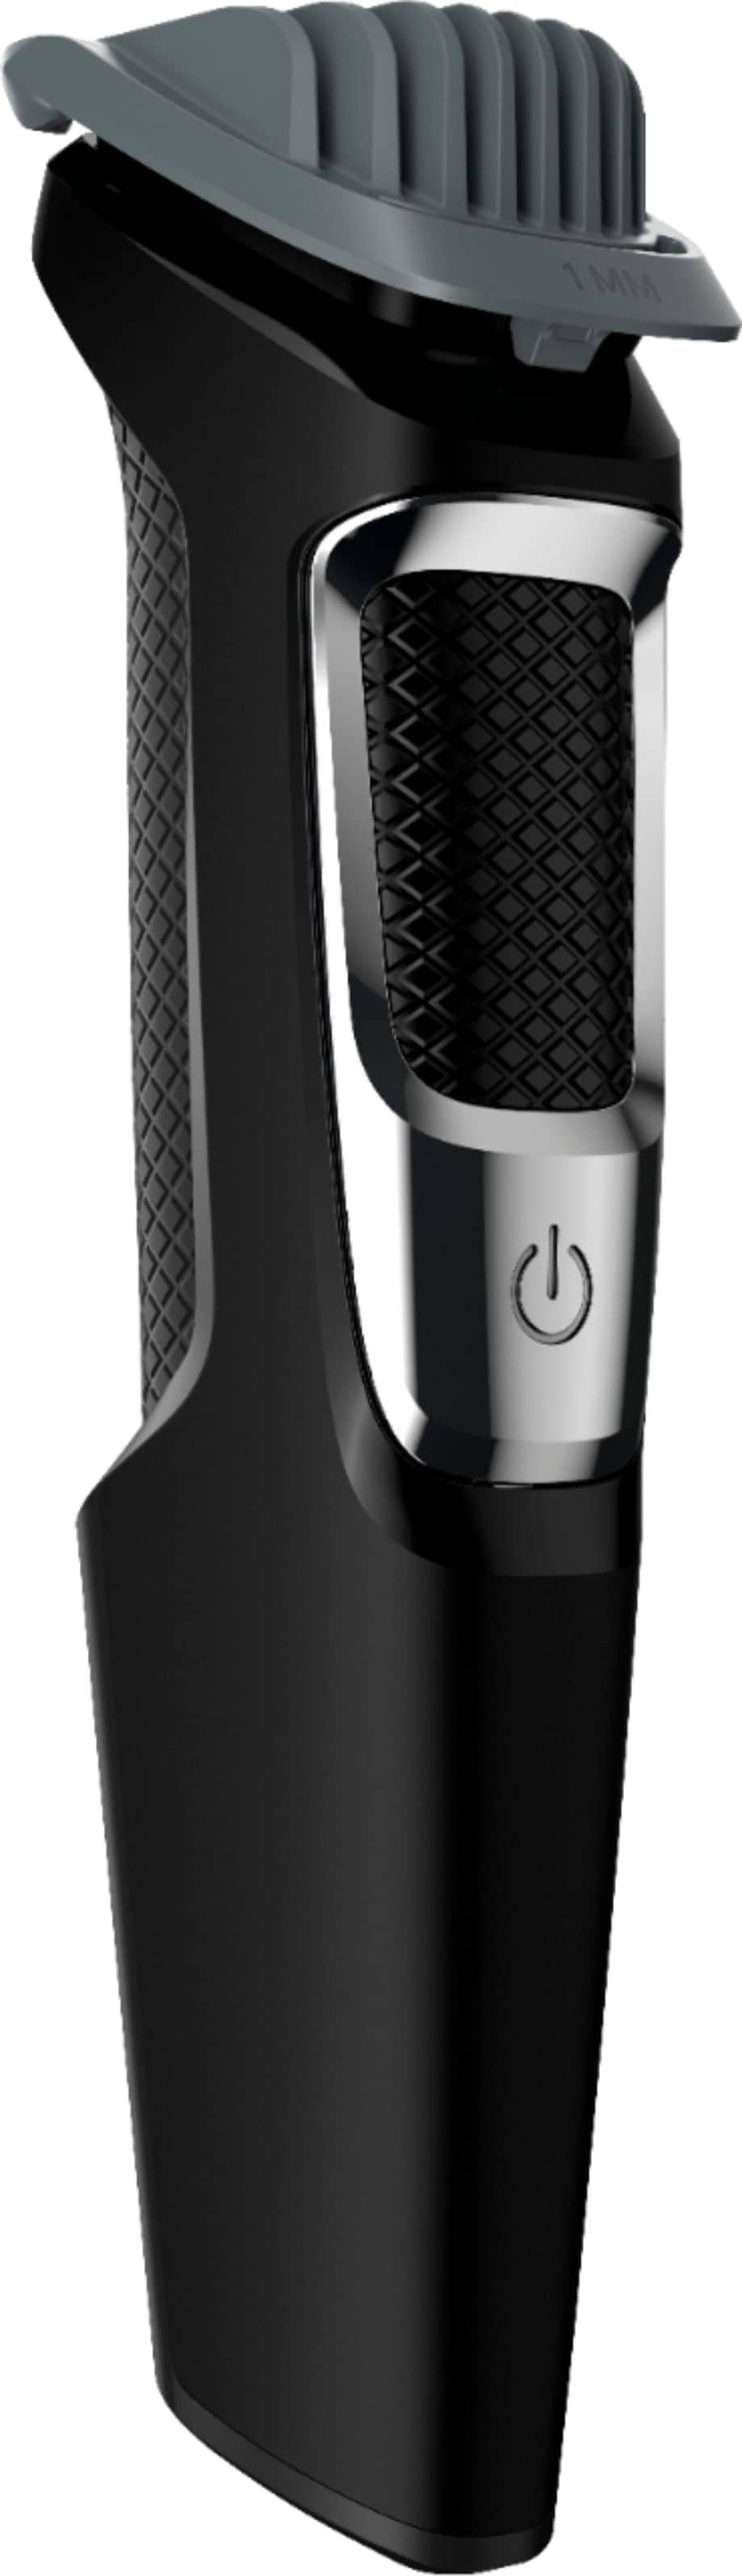 Philips Norelco - Multigroom 3000 Beard, Moustache, Ear and Nose Trimmer - Black/silver_9